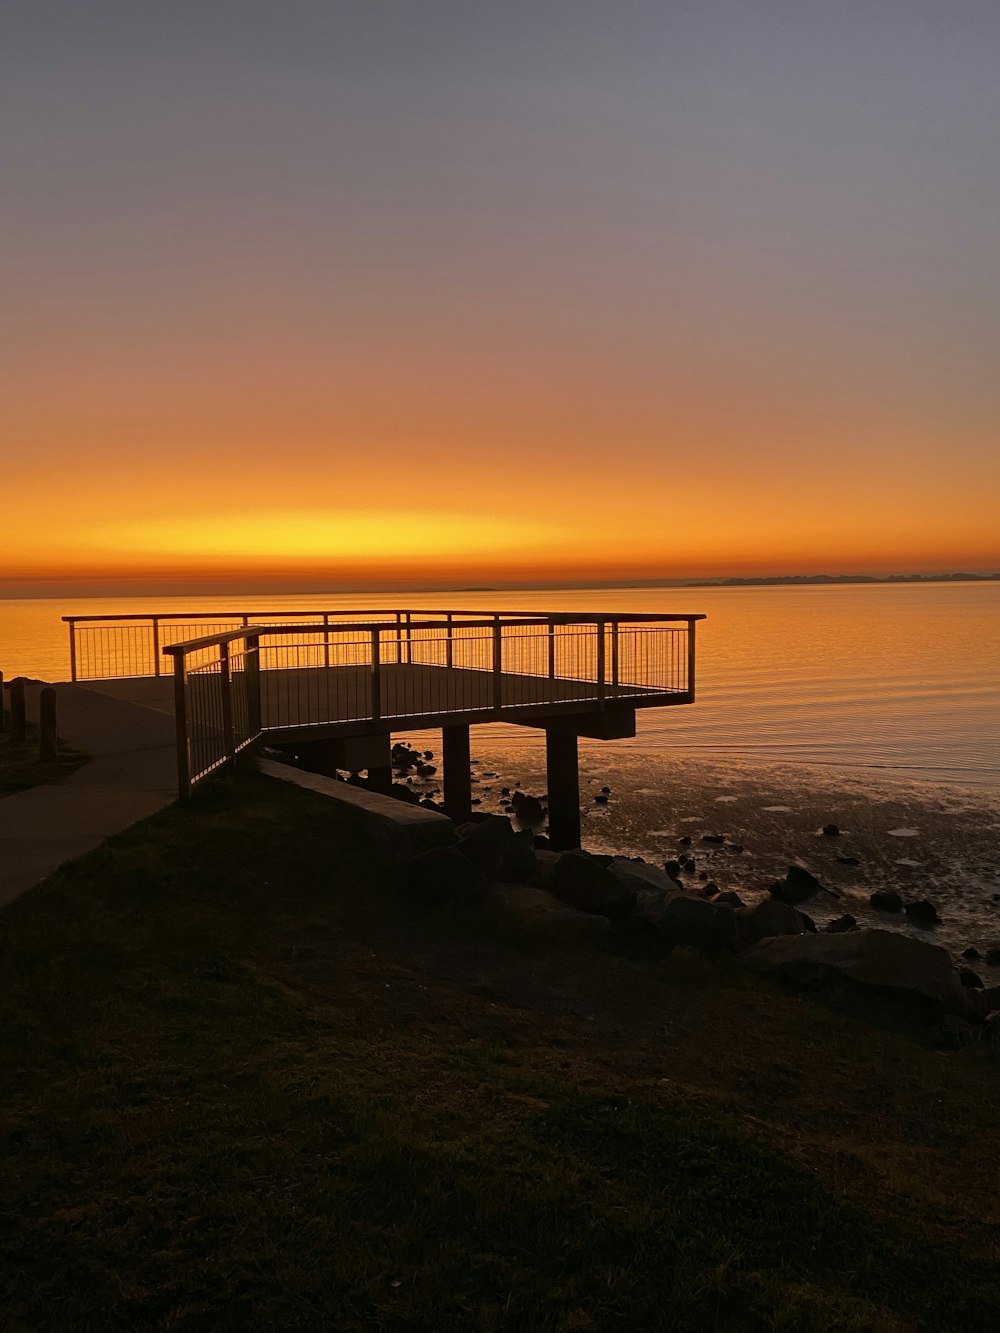 a wooden bridge over a body of water at sunset